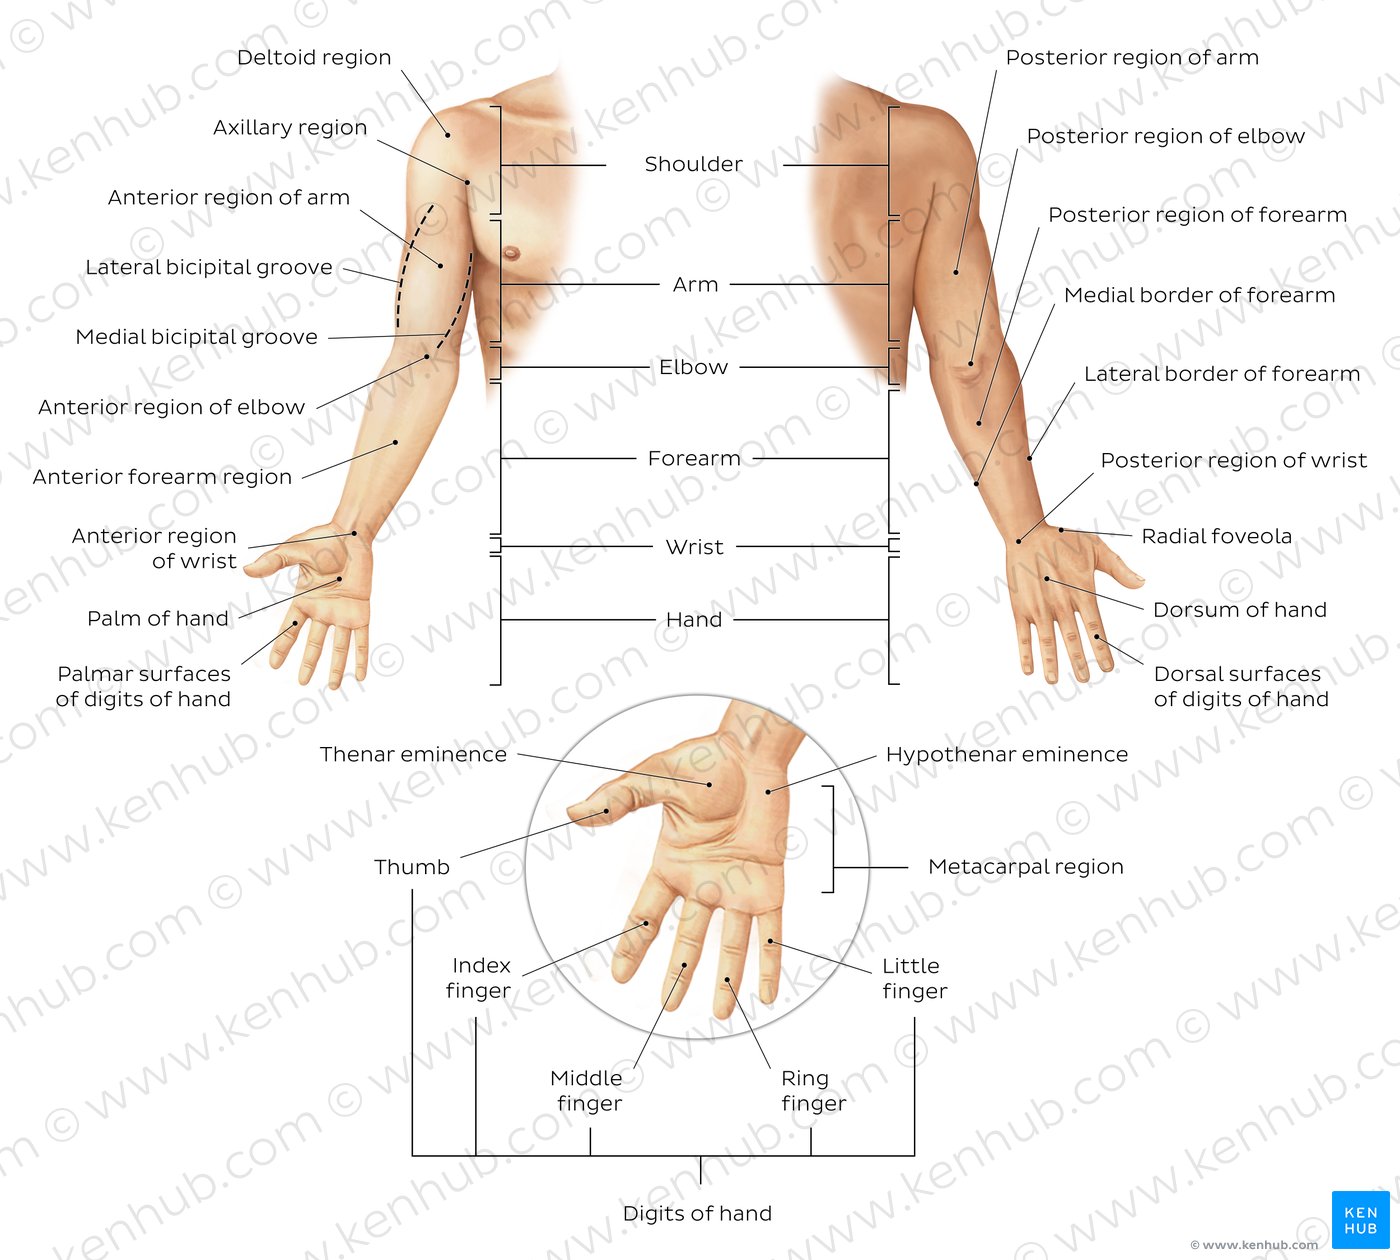 Regions of the upper extremity